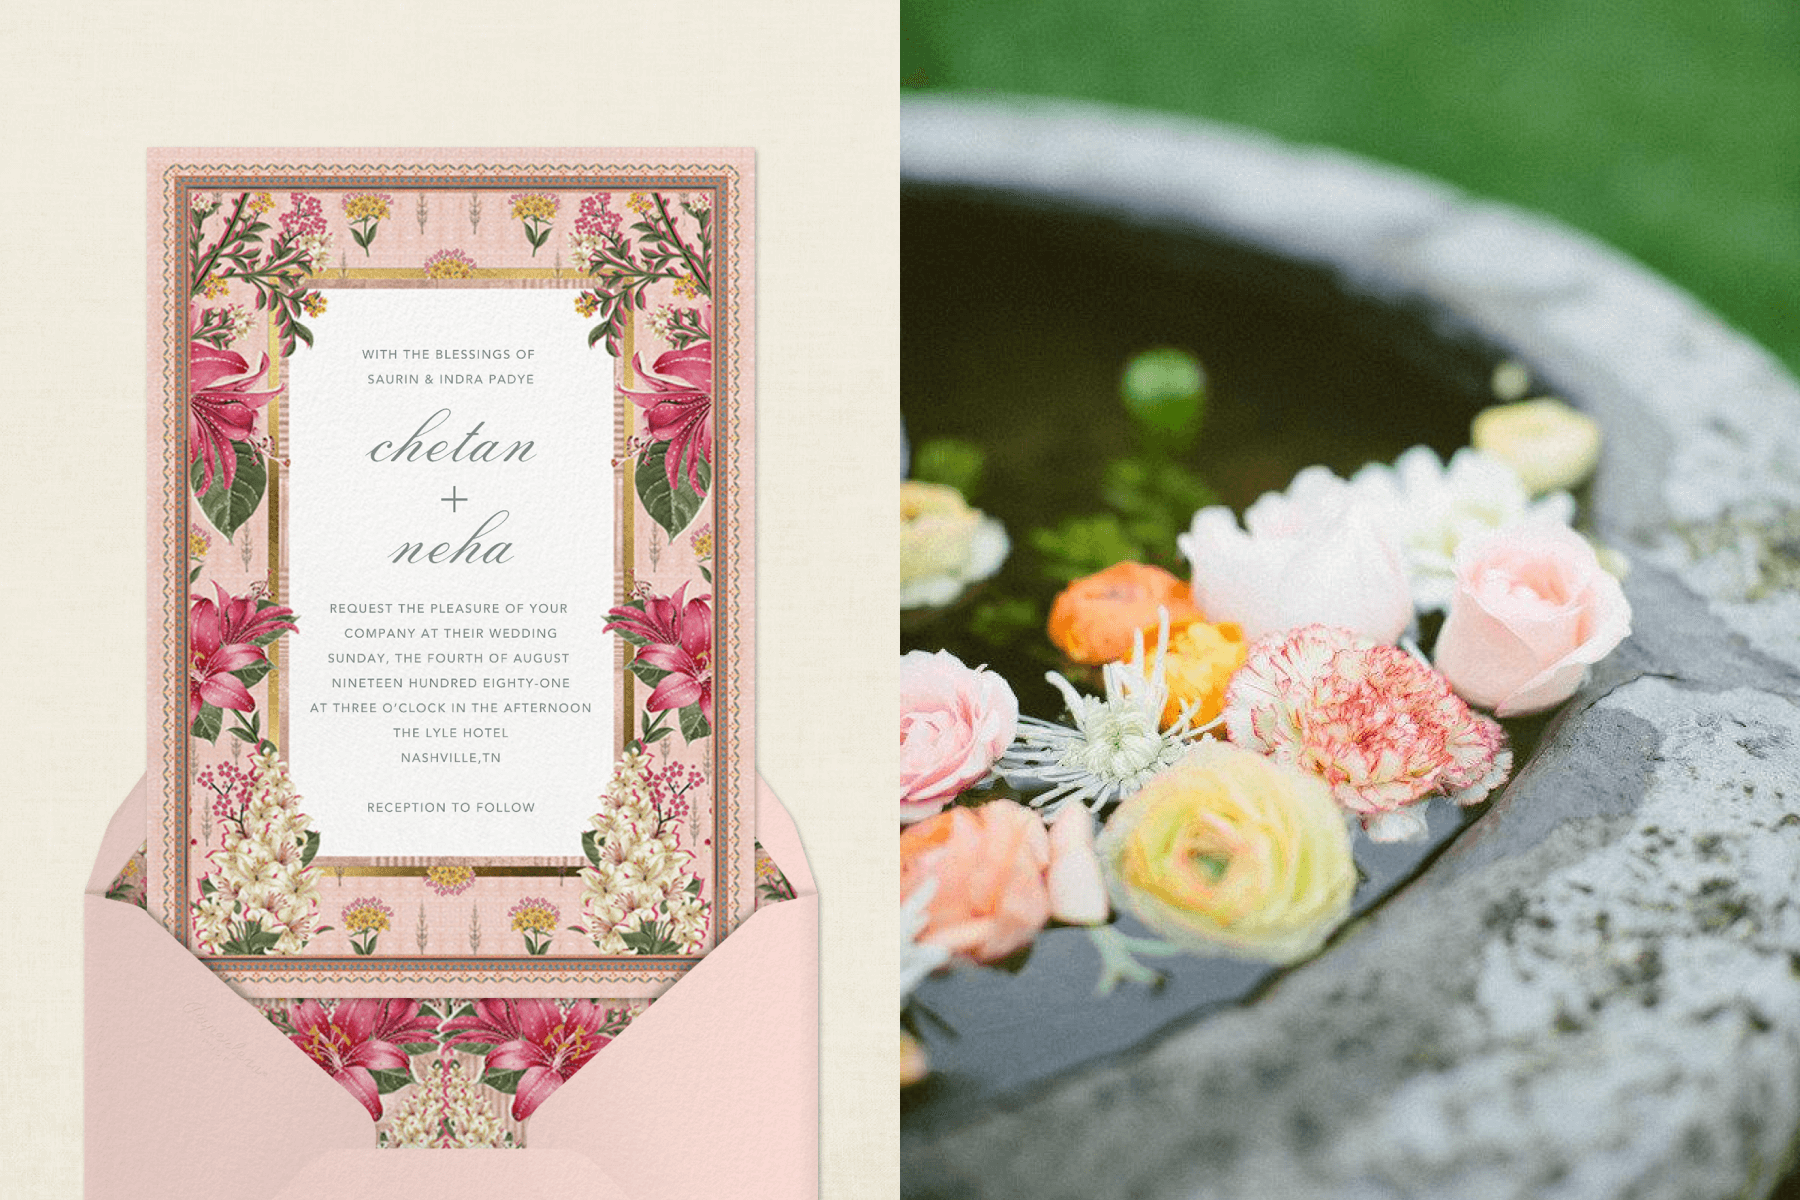 Left: A wedding invitation with an ornate pink floral border. Right: A closeup of flowers floating in a fountain.